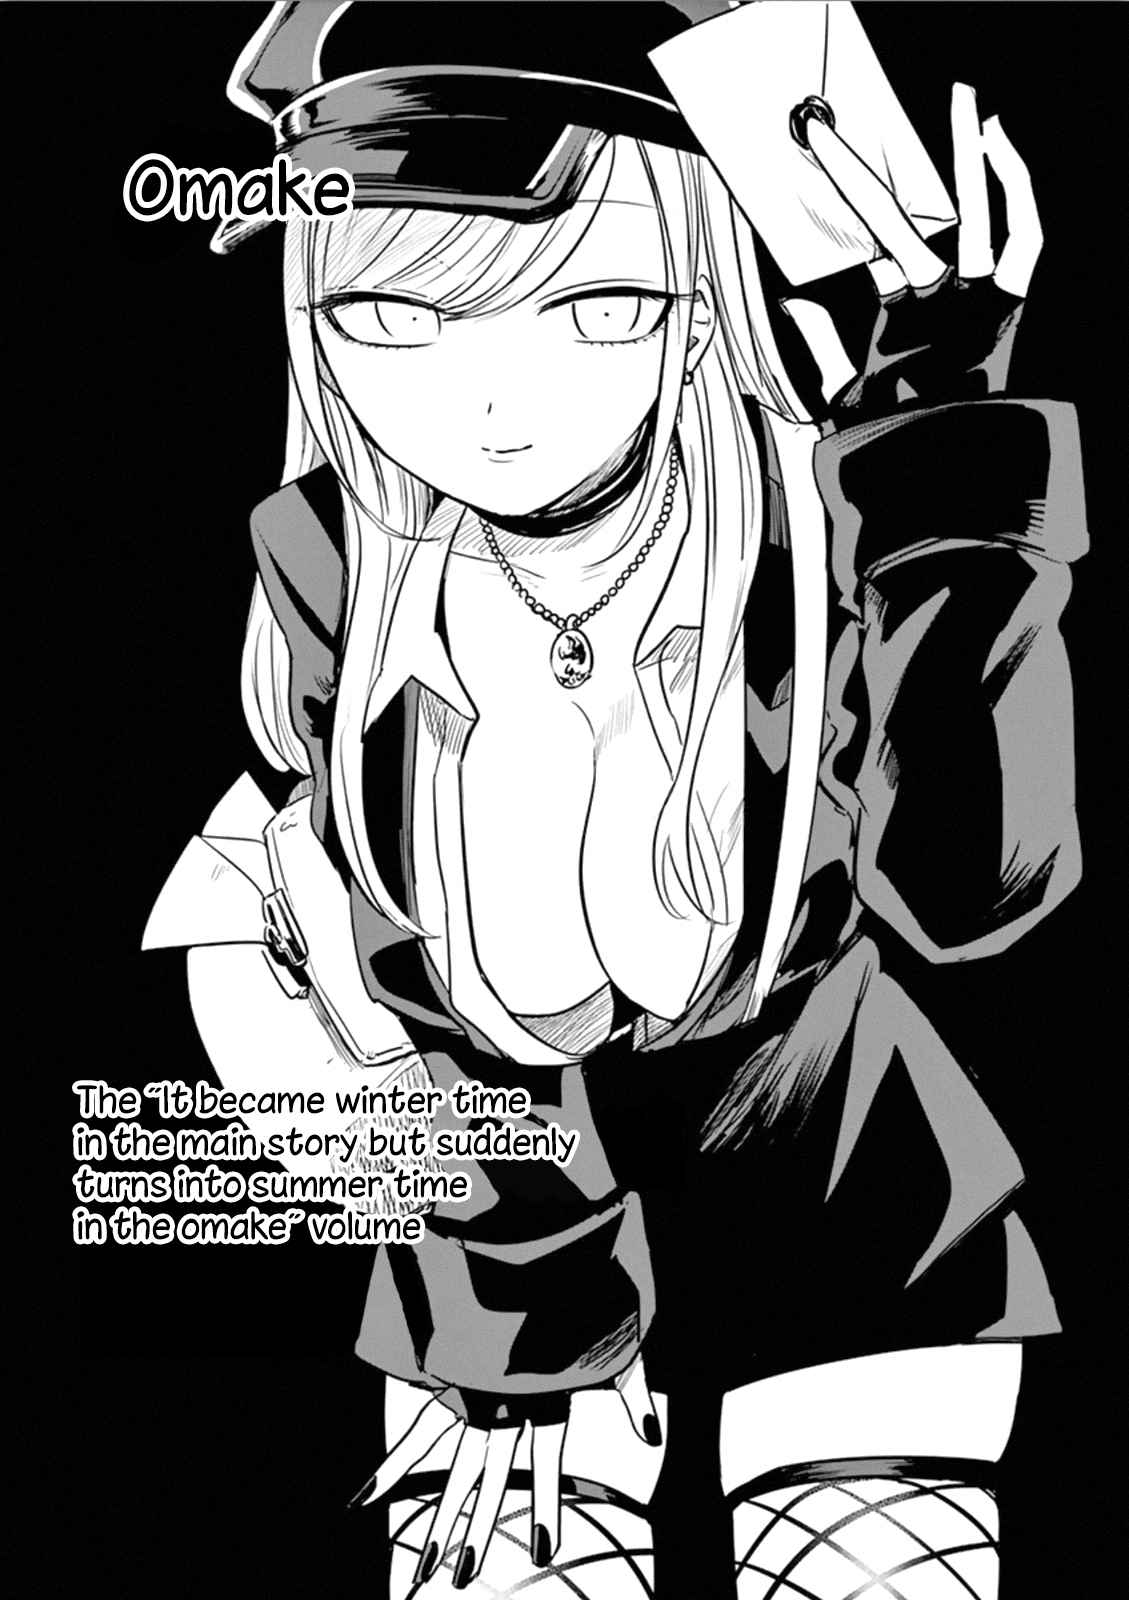 The Duke of Death and His Black Maid Vol. 2 Ch. 28.5 Omake